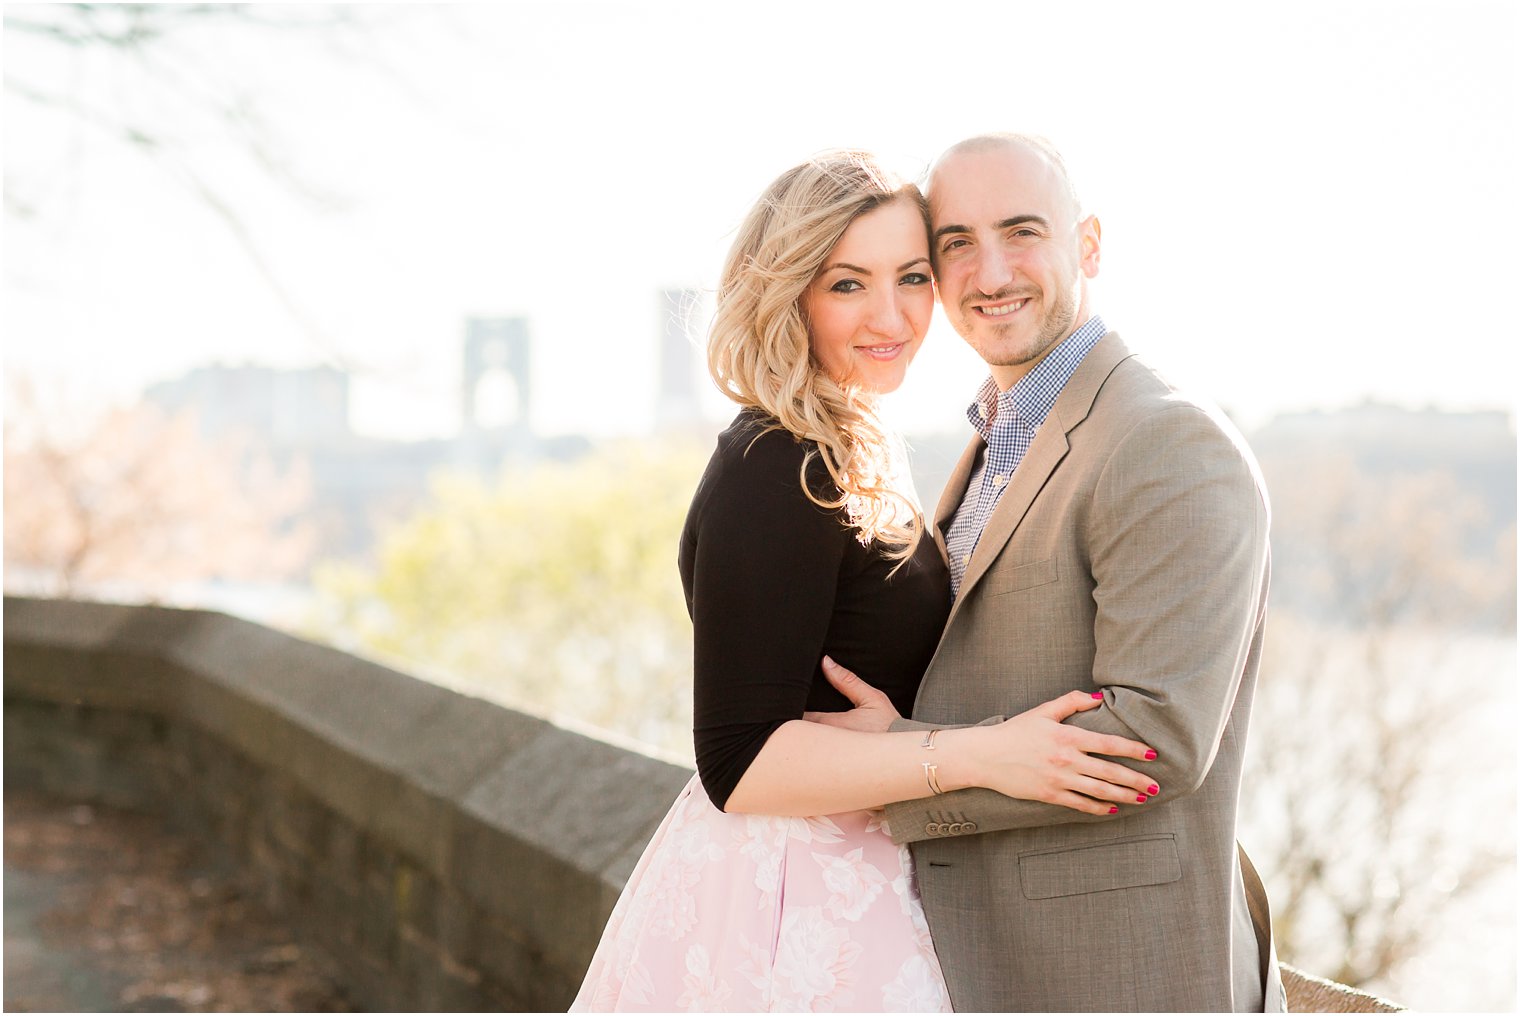 Engagement Photos in NYC | Fort Tryon Park Engagement